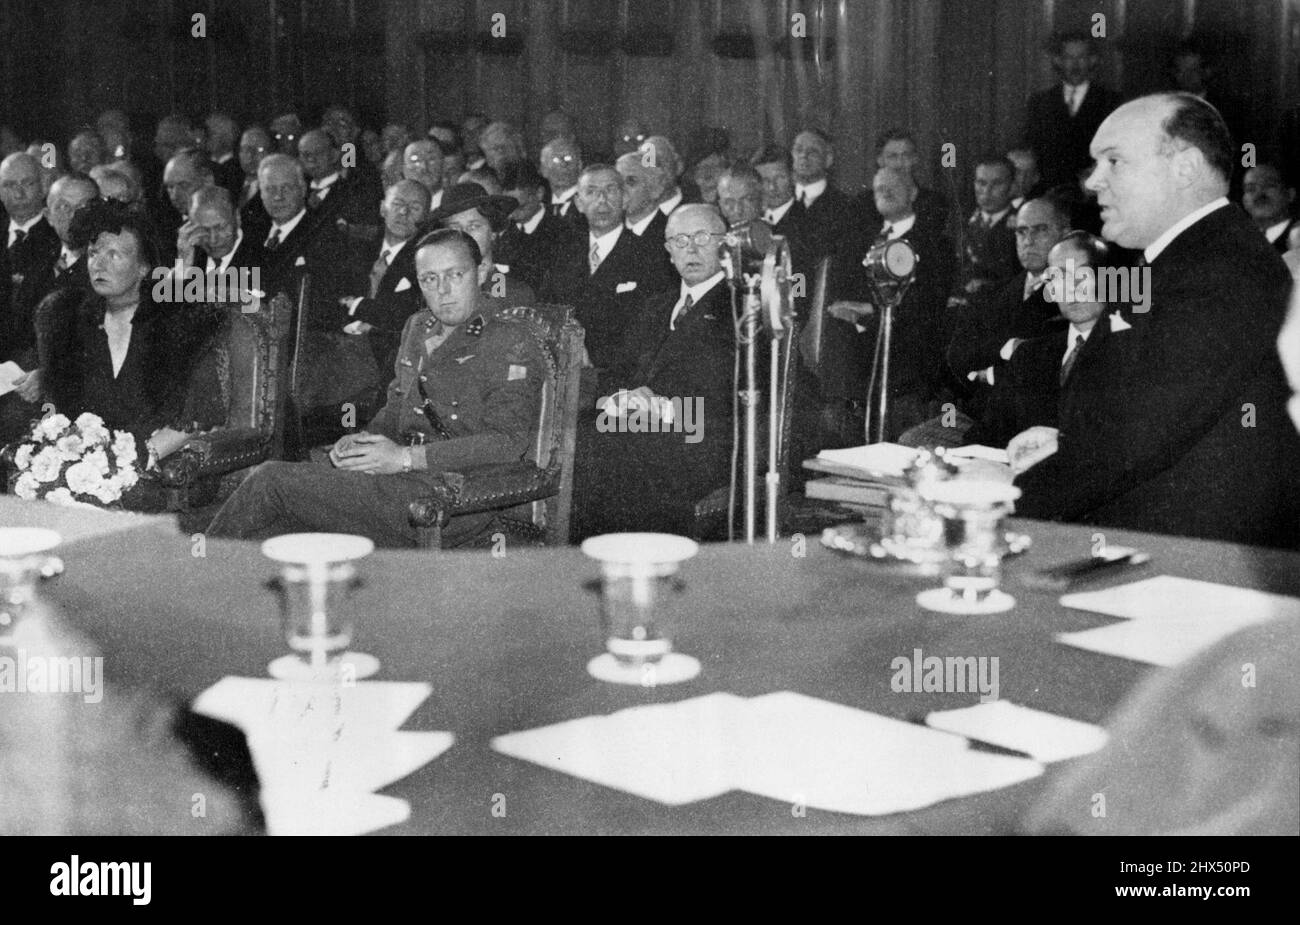 Minister Spaak addressing the court, Princess Juliana and Prince Bernhard (at left) listening. May 01, 1946. Stock Photo